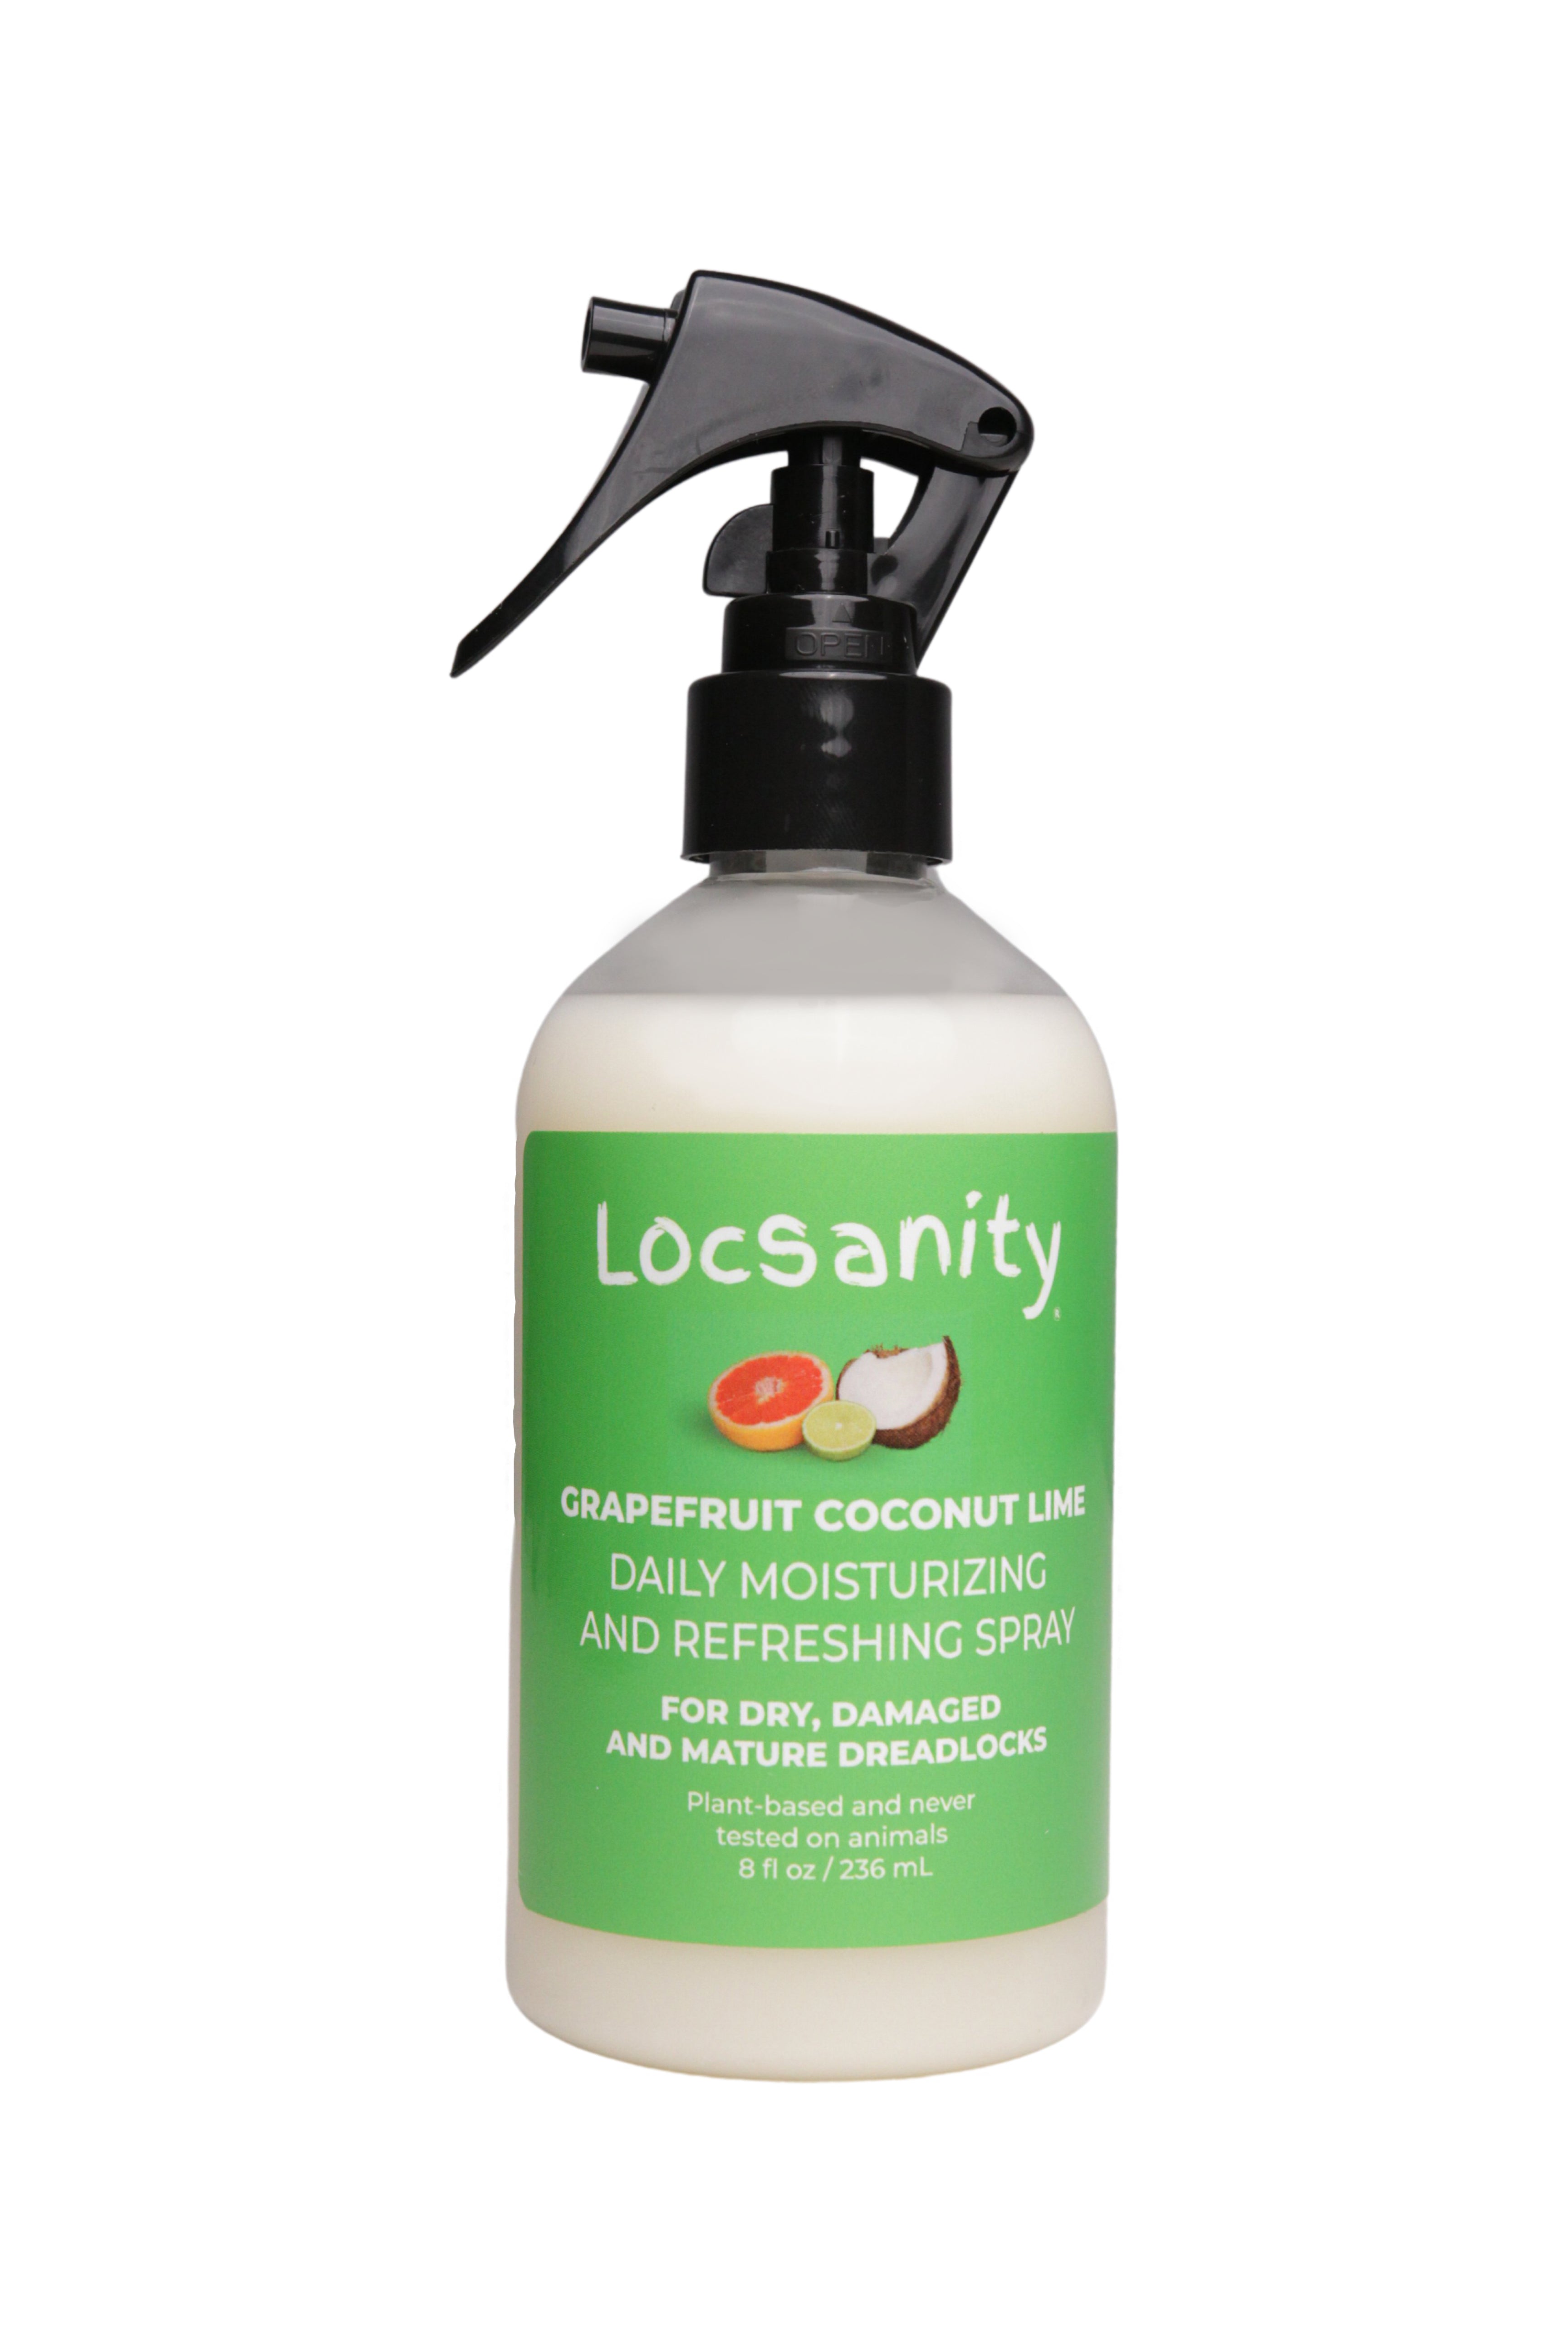 Rosewater and Peppermint Daily Moisturizing/Refreshing Spray – Locsanity